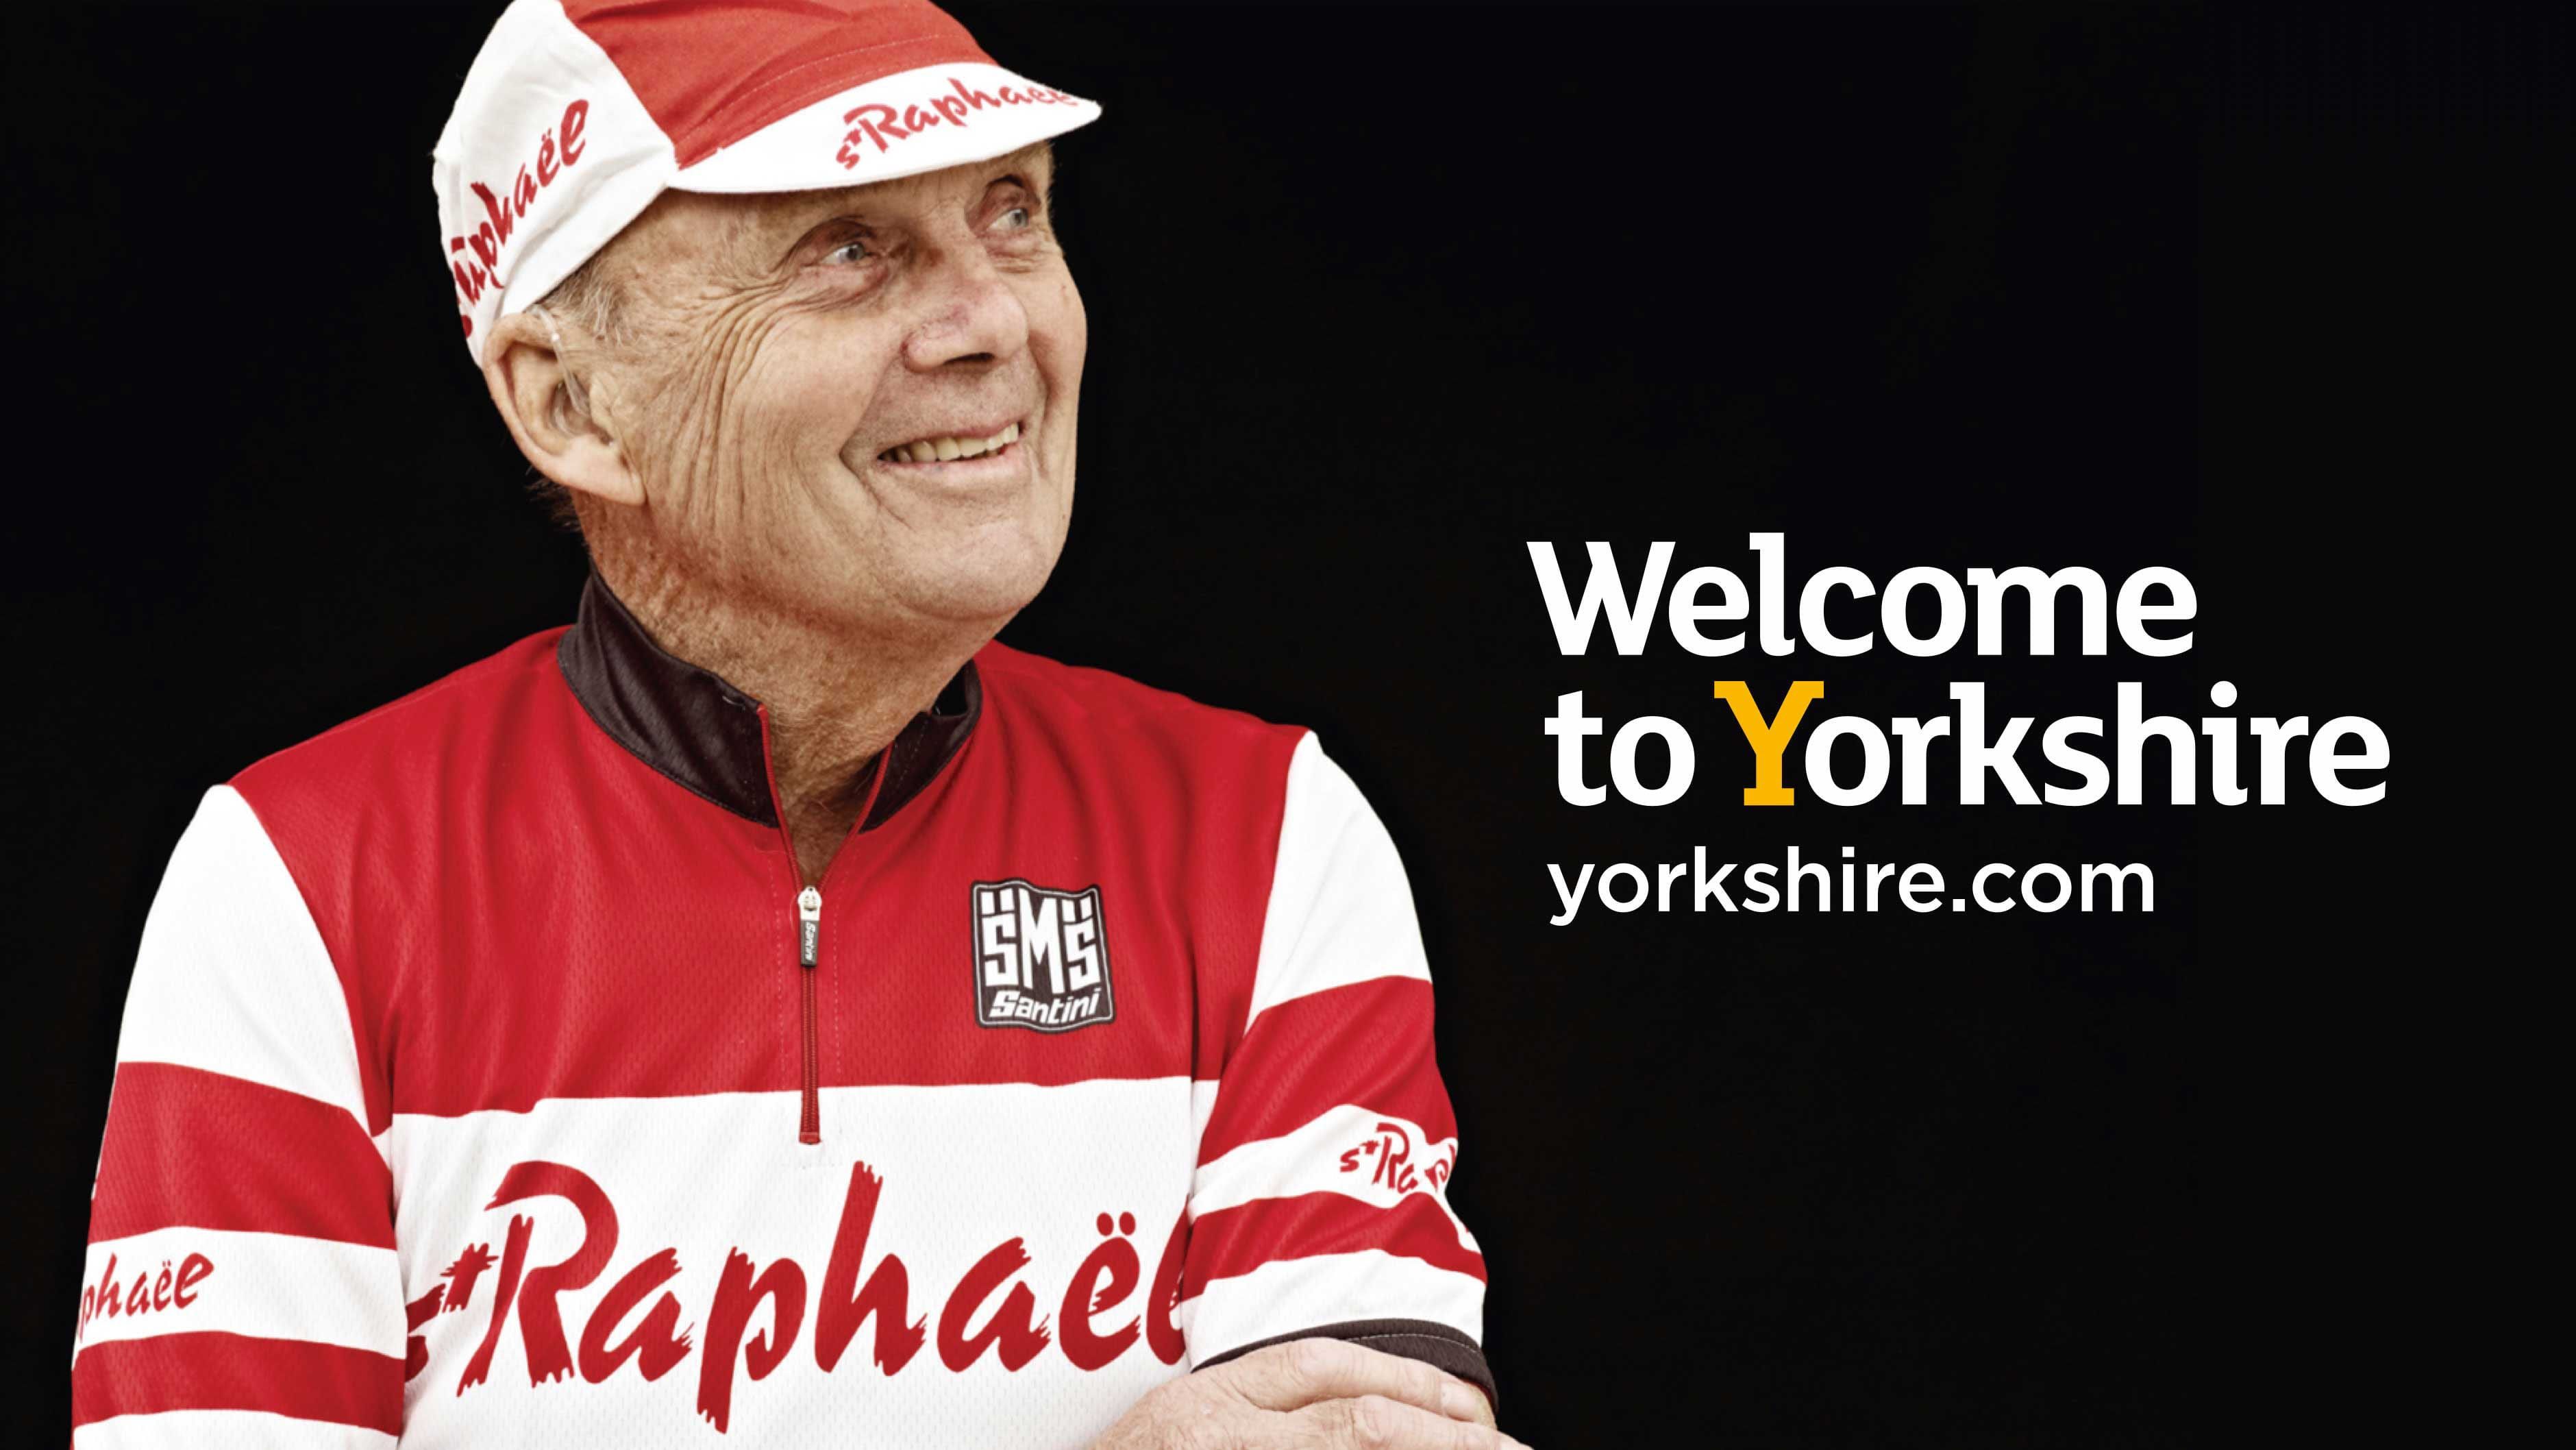 Welcome to Yorkshire: Tour de Yorkshire